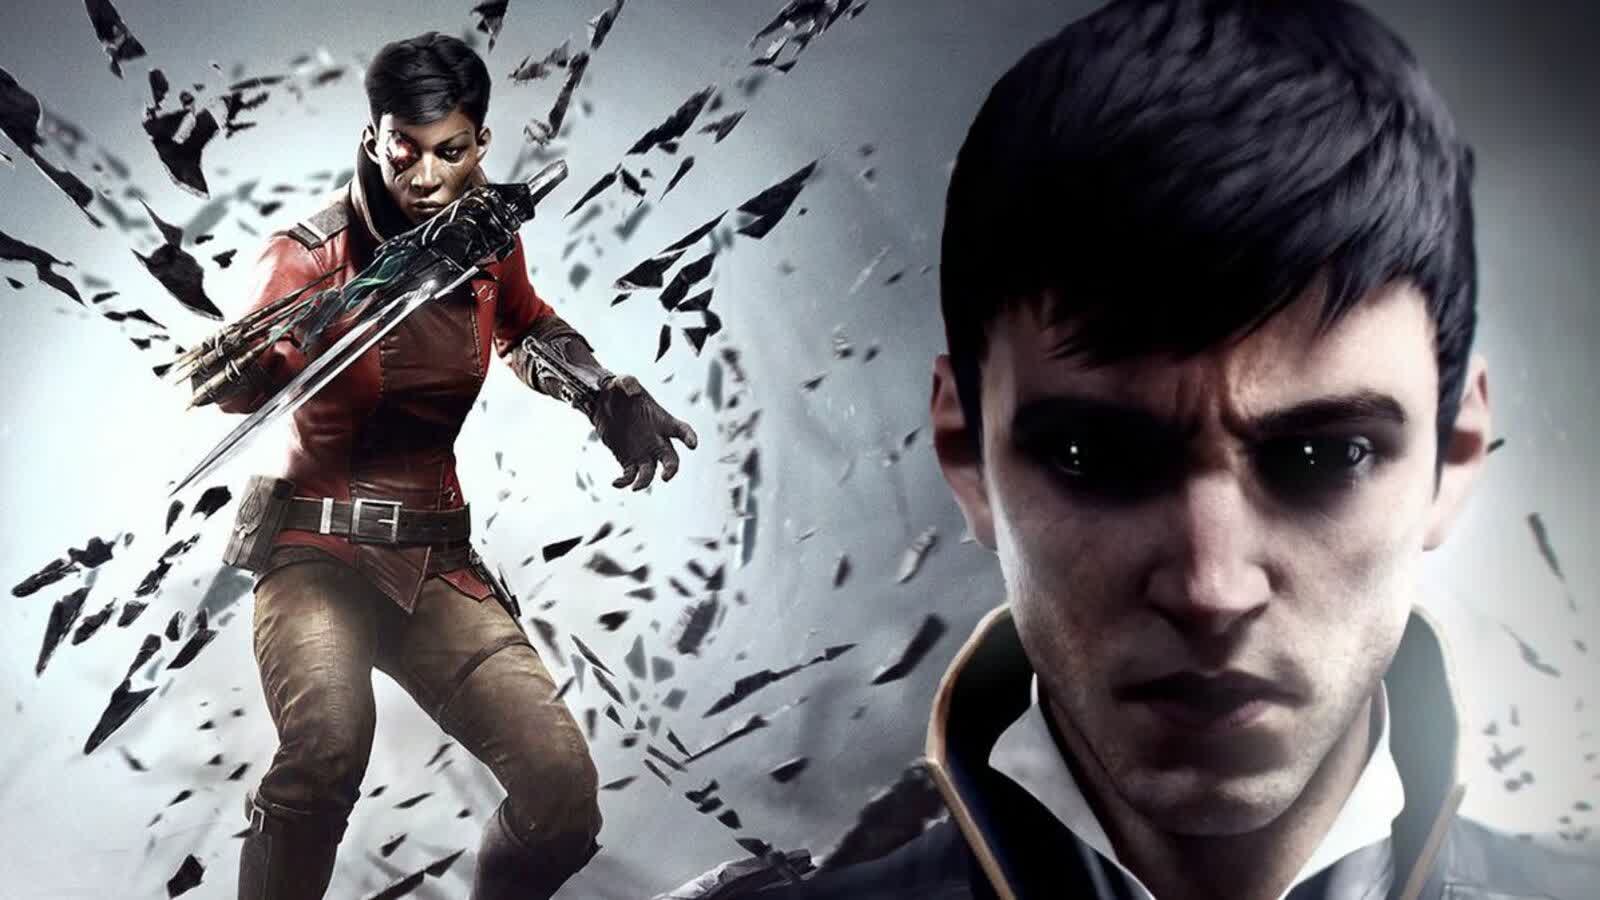 Free games alert: Dishonored: Death of the Outsider and The Elder Scrolls III are currently available for nothing